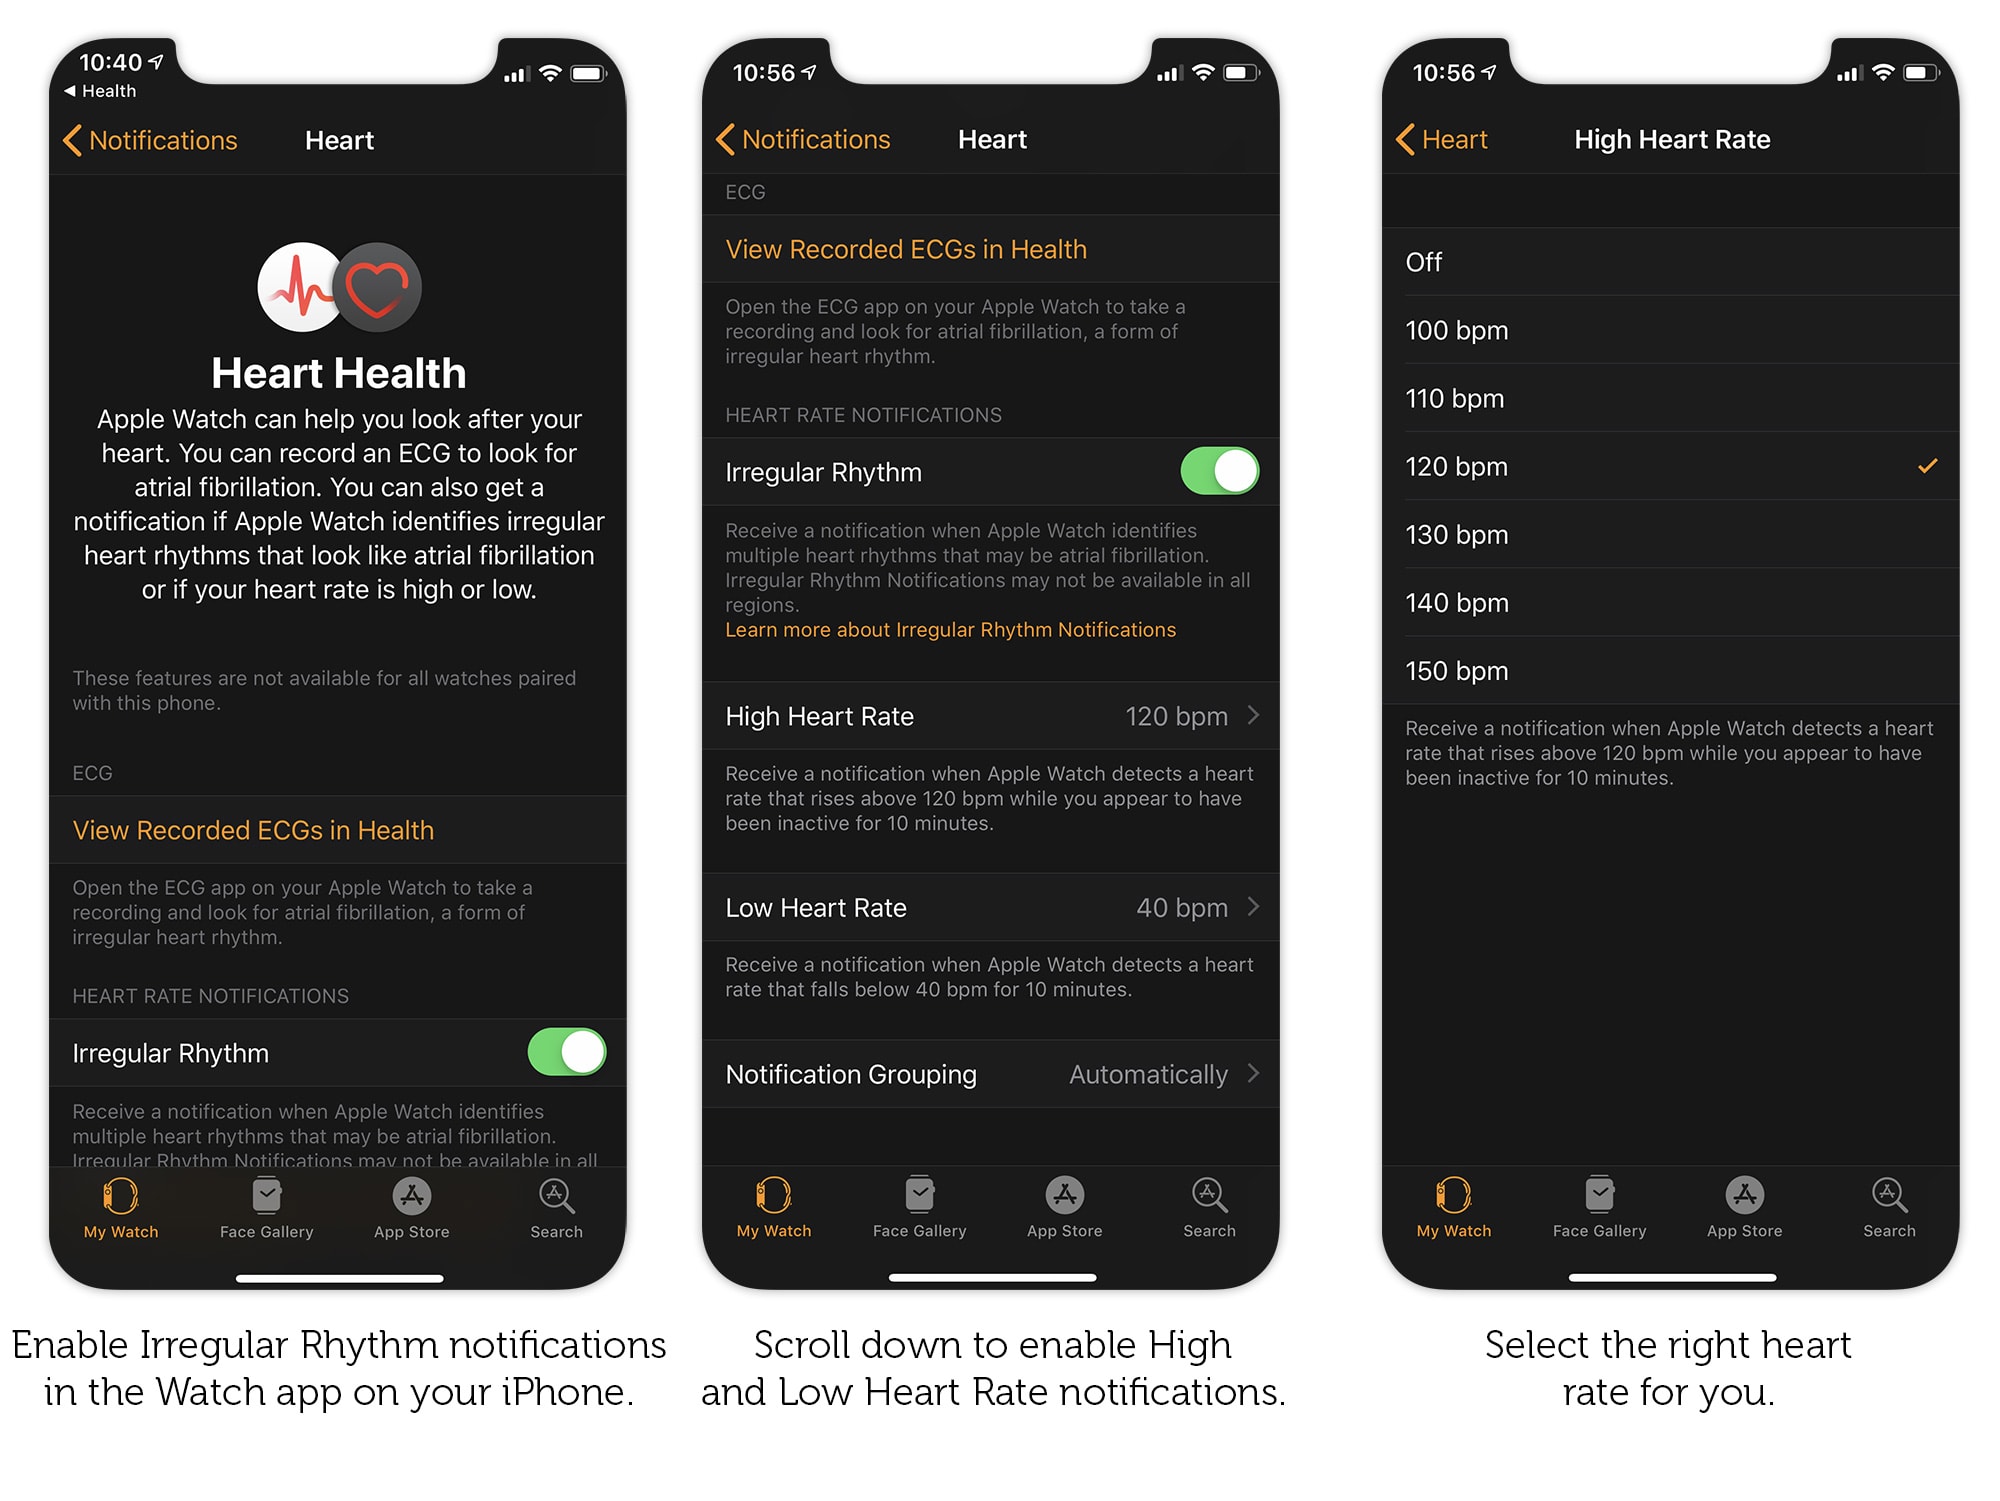 Set up heart notifications in the iPhone Watch app